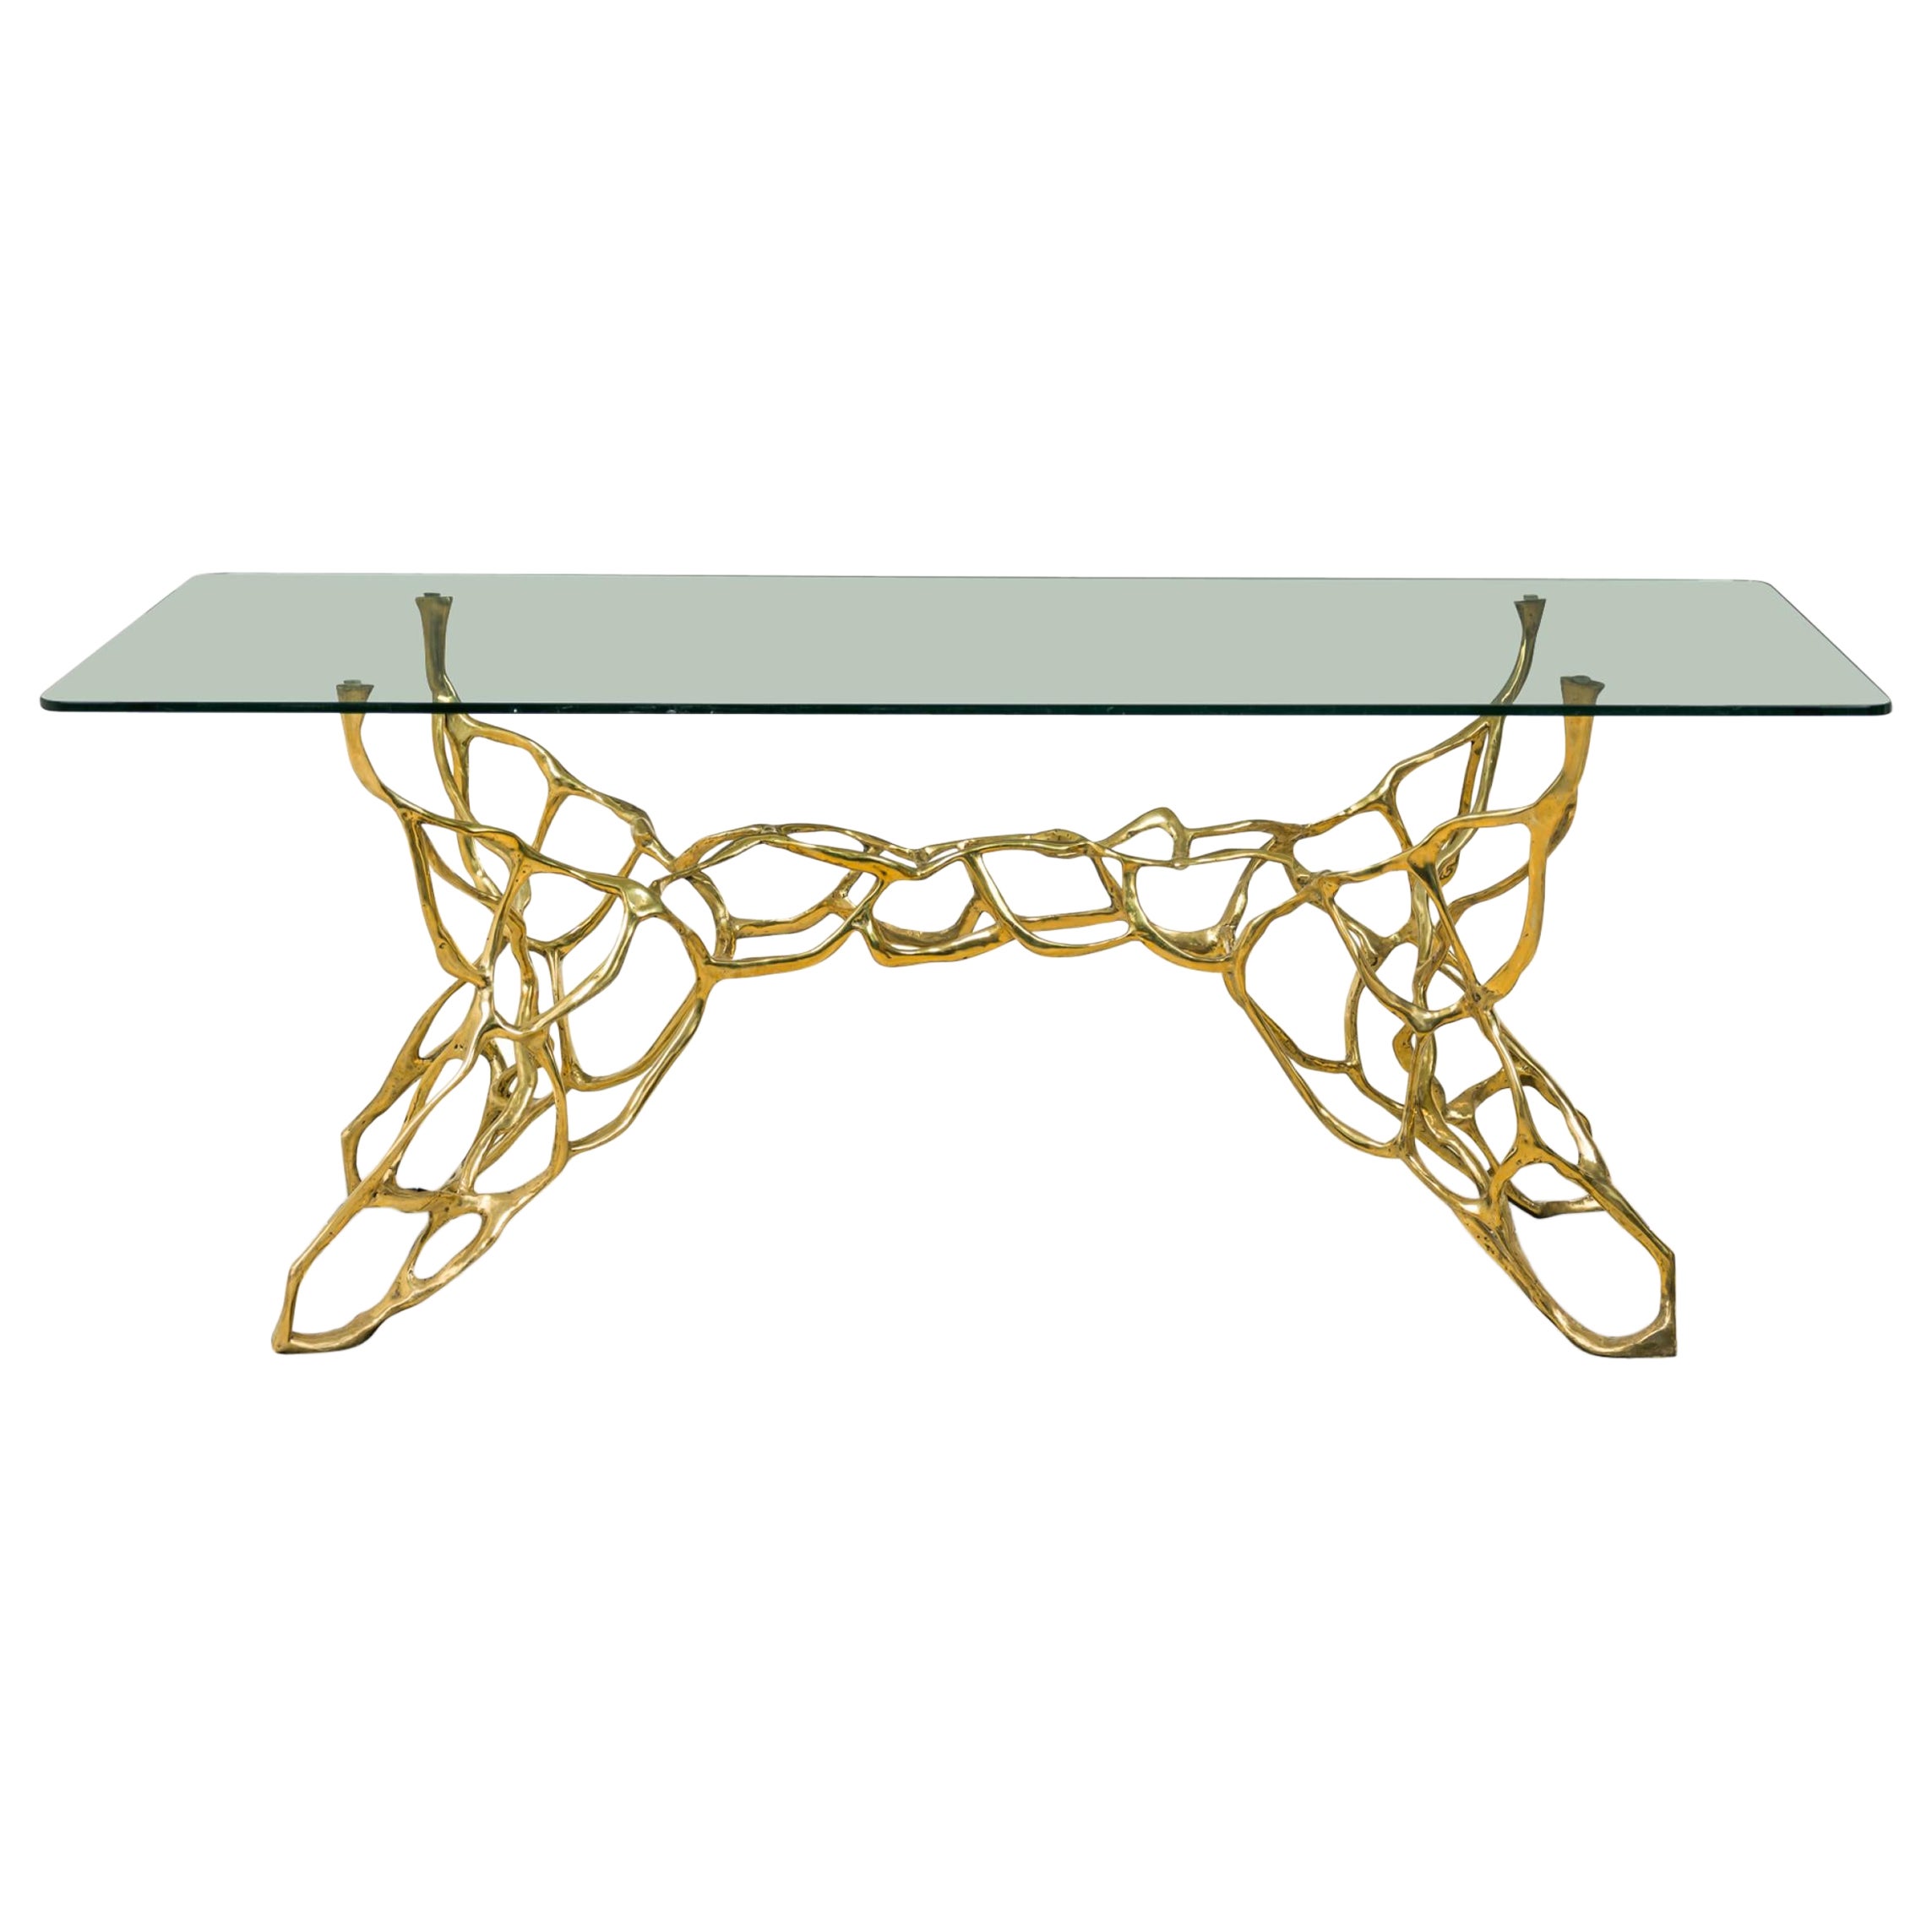 "Catarina" Rectangular Biomorphic Dining Table by Newel Modern For Sale